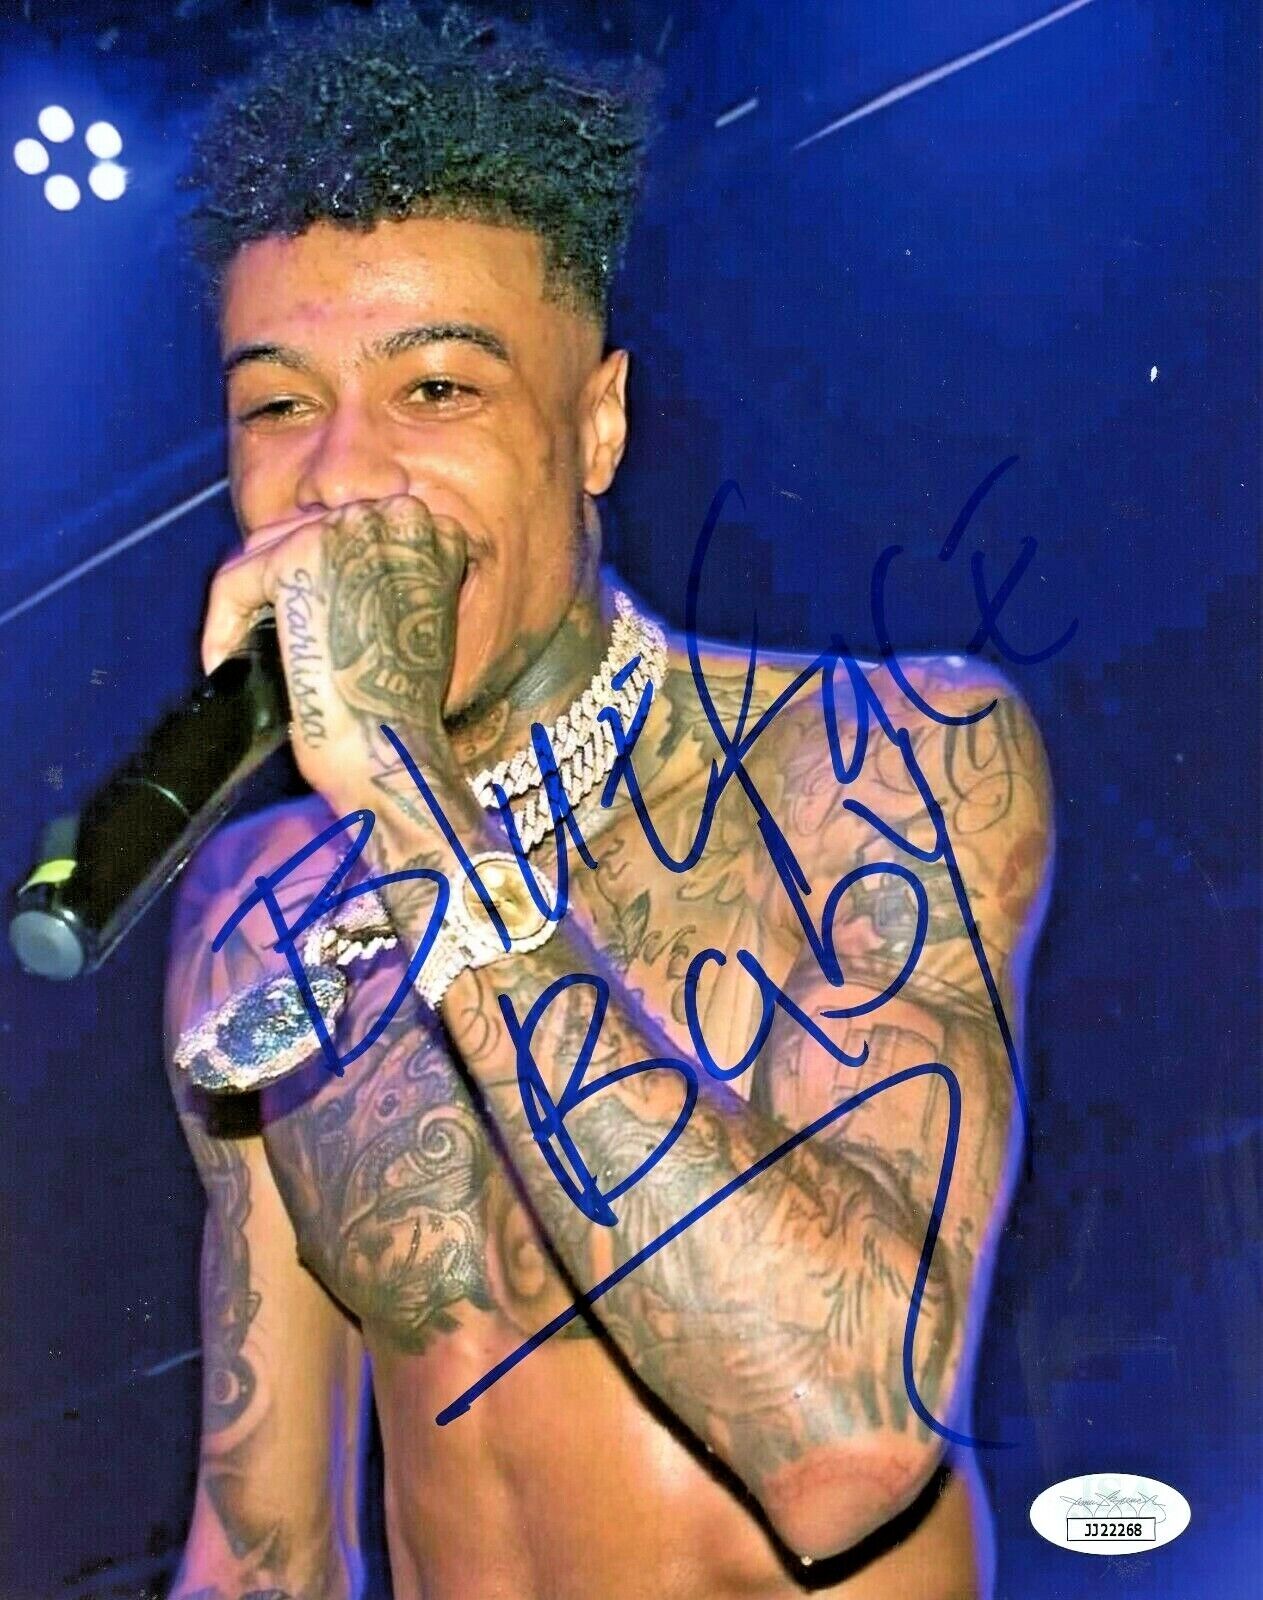 BLUEFACE BABY HAND SIGNED AUTOGRAPHED 8X10 HIP HOP MUSIC Photo Poster painting WITH JSA COA 3